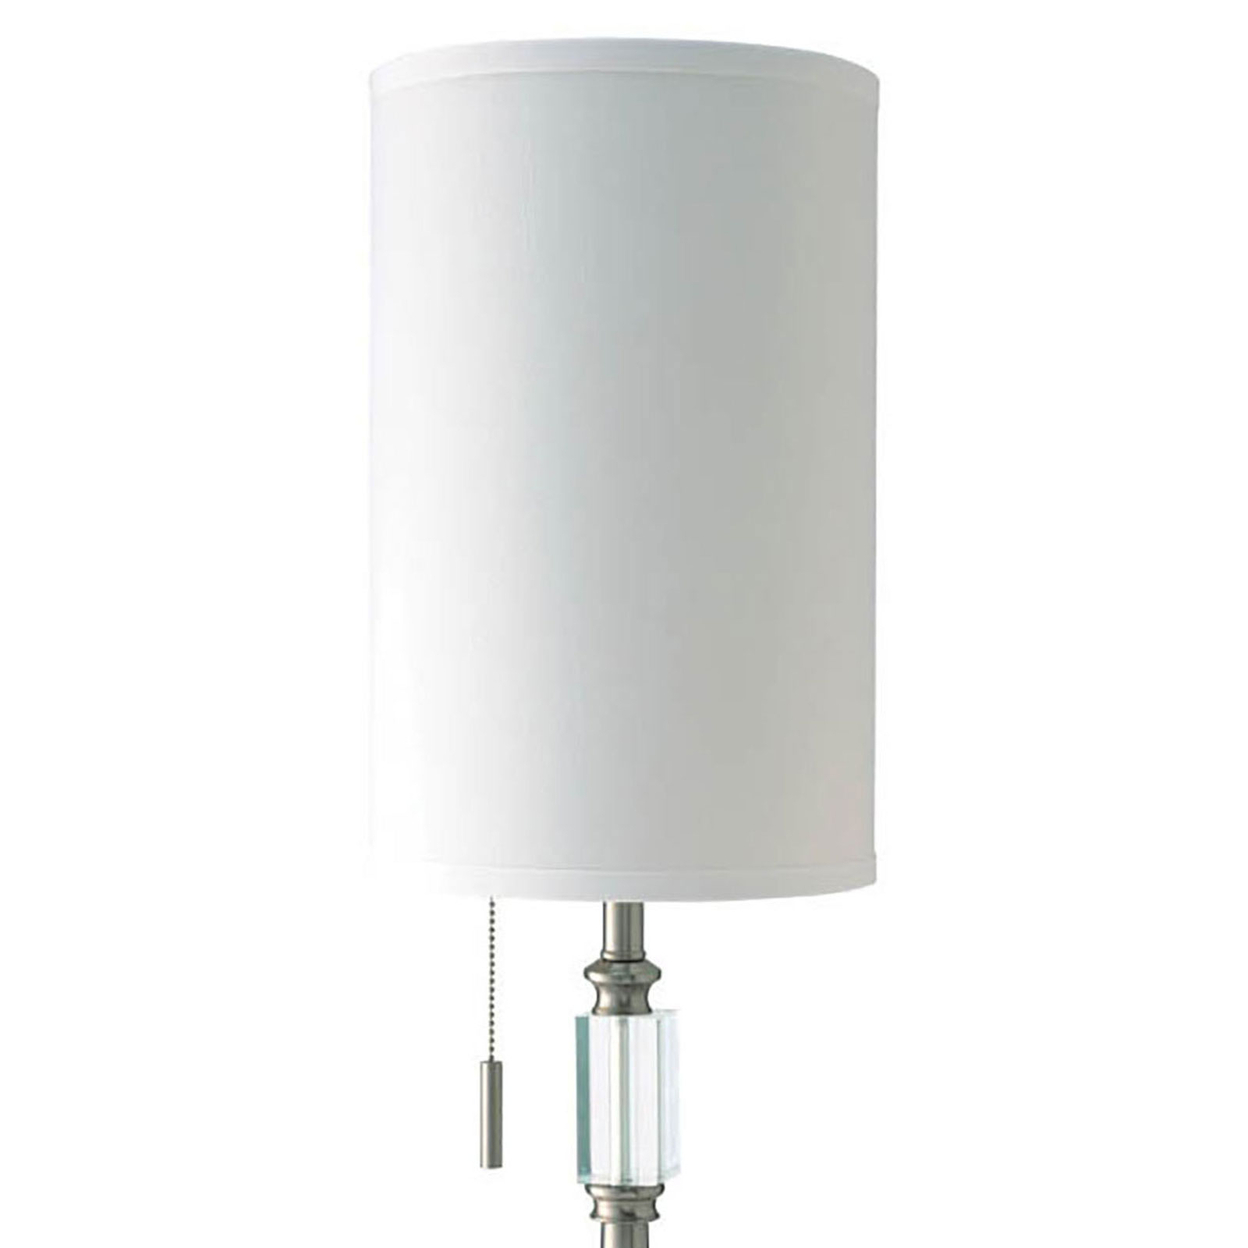 Contemporary Table Lamp With Pull Chain Switch And Trumpet Base, Silver- Saltoro Sherpi